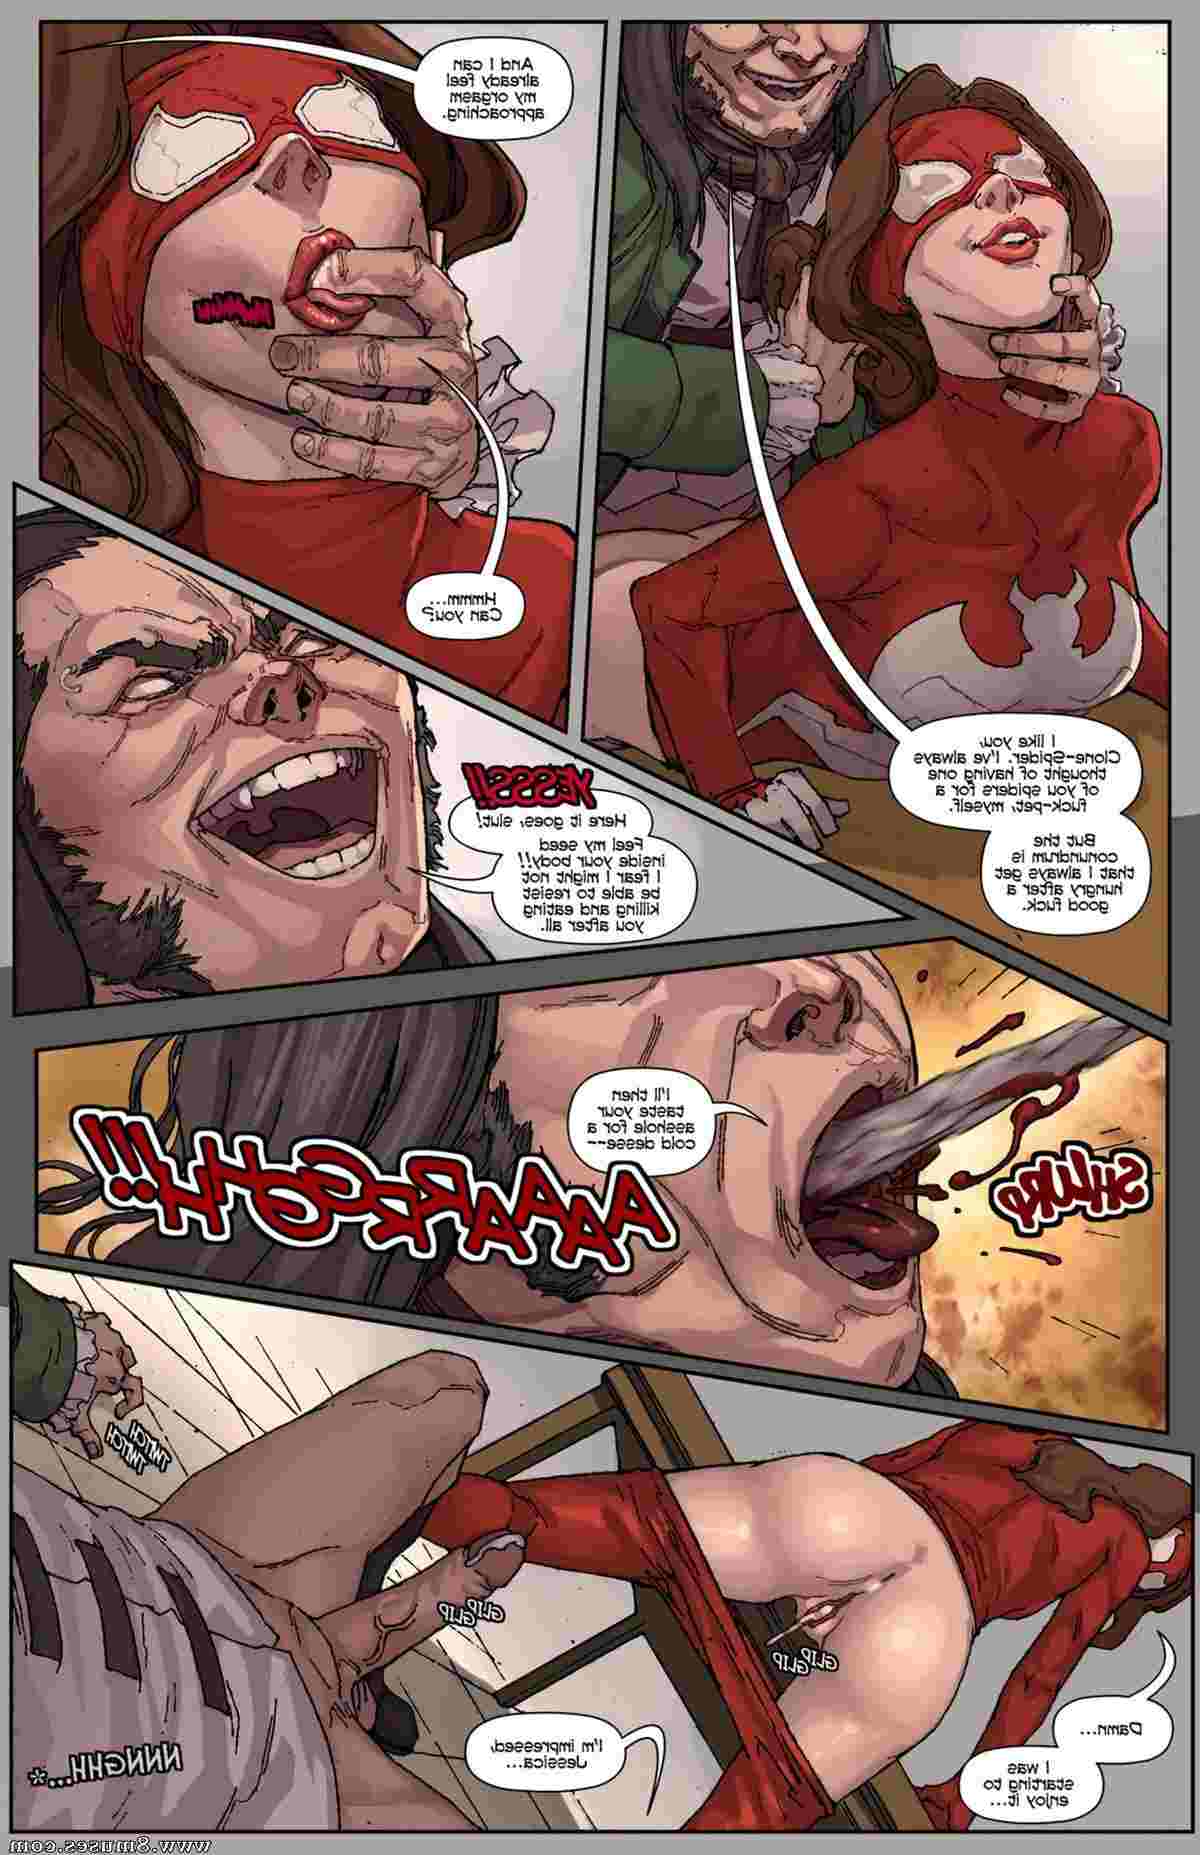 Tracy-Scops-Comics/Scarlet-Spiders Scarlet_Spiders__8muses_-_Sex_and_Porn_Comics_4.jpg